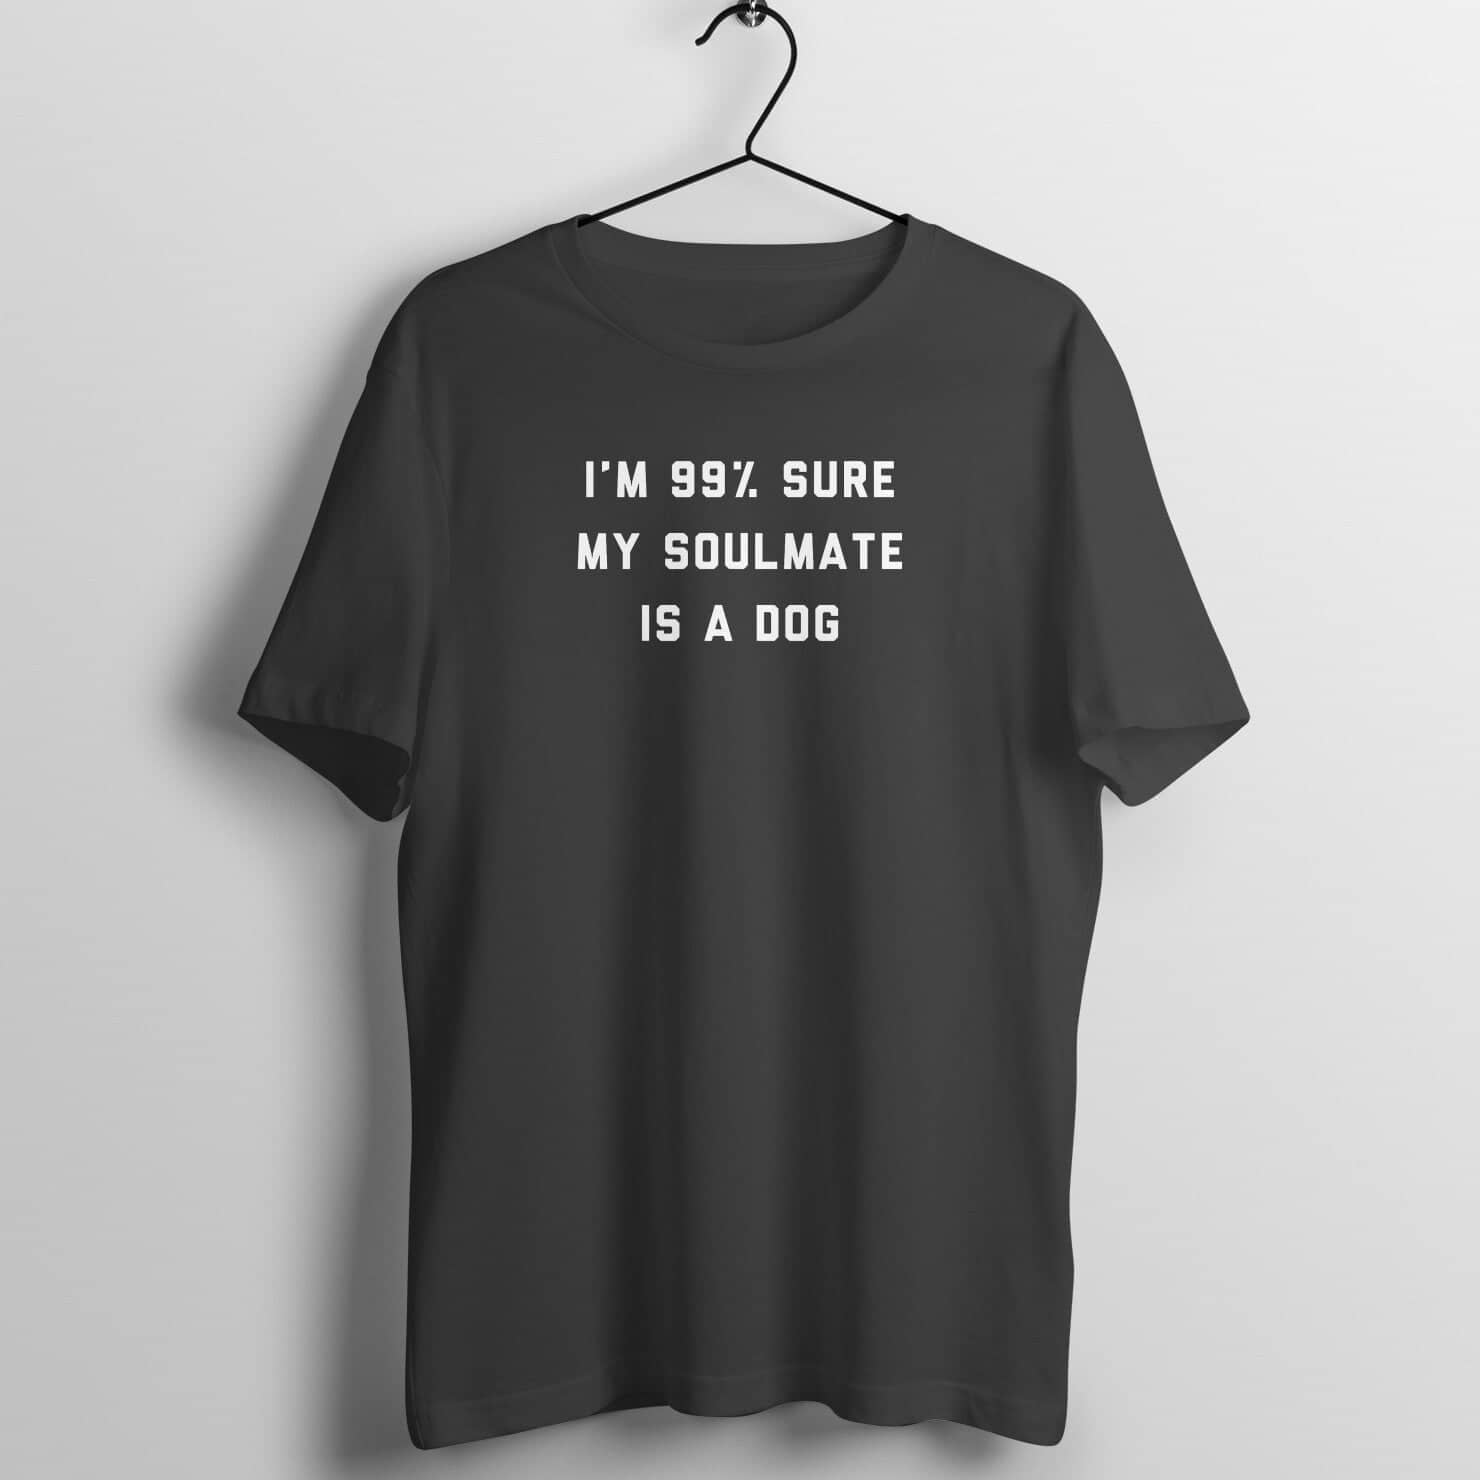 I'm 99% Sure My Soulmate is A Dog Funny Black T Shirt for Men and Women freeshipping - Catch My Drift India